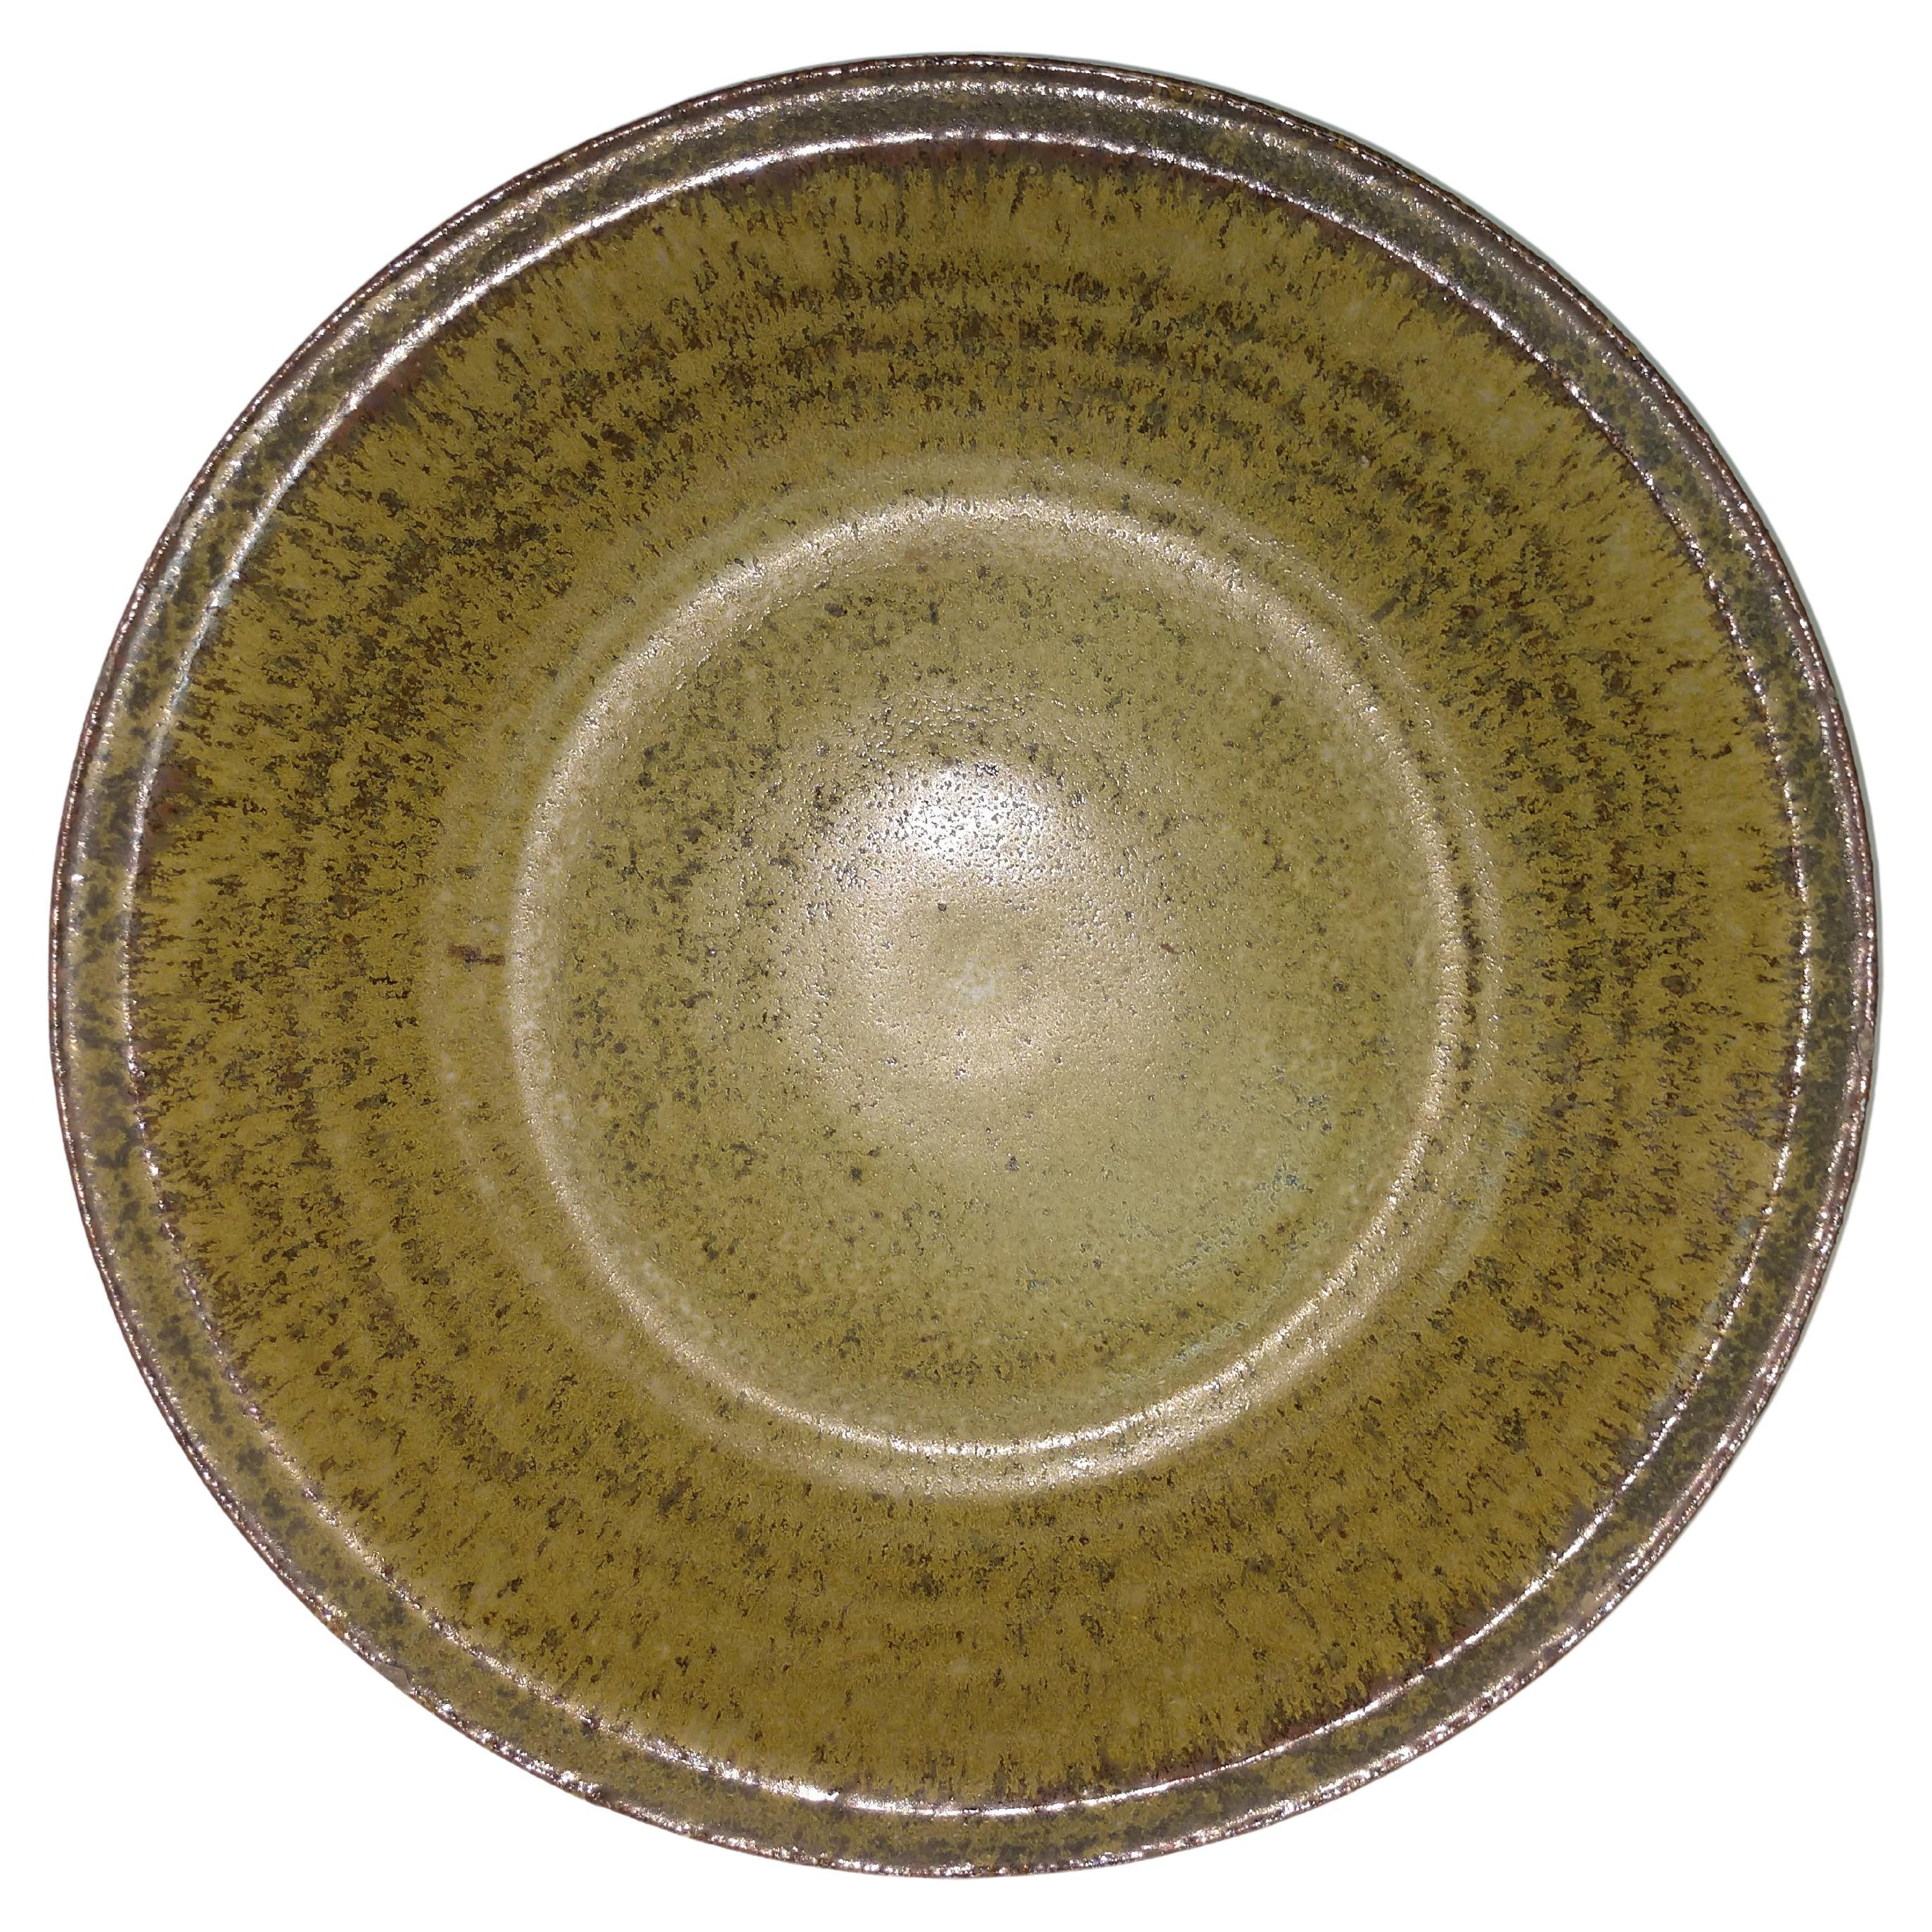 Fabulous mottled green with brown edged charger. Concentric ribs outline the dish. Truly a beautiful piece. Signed HS. Herbert Sargent. Measures: 3